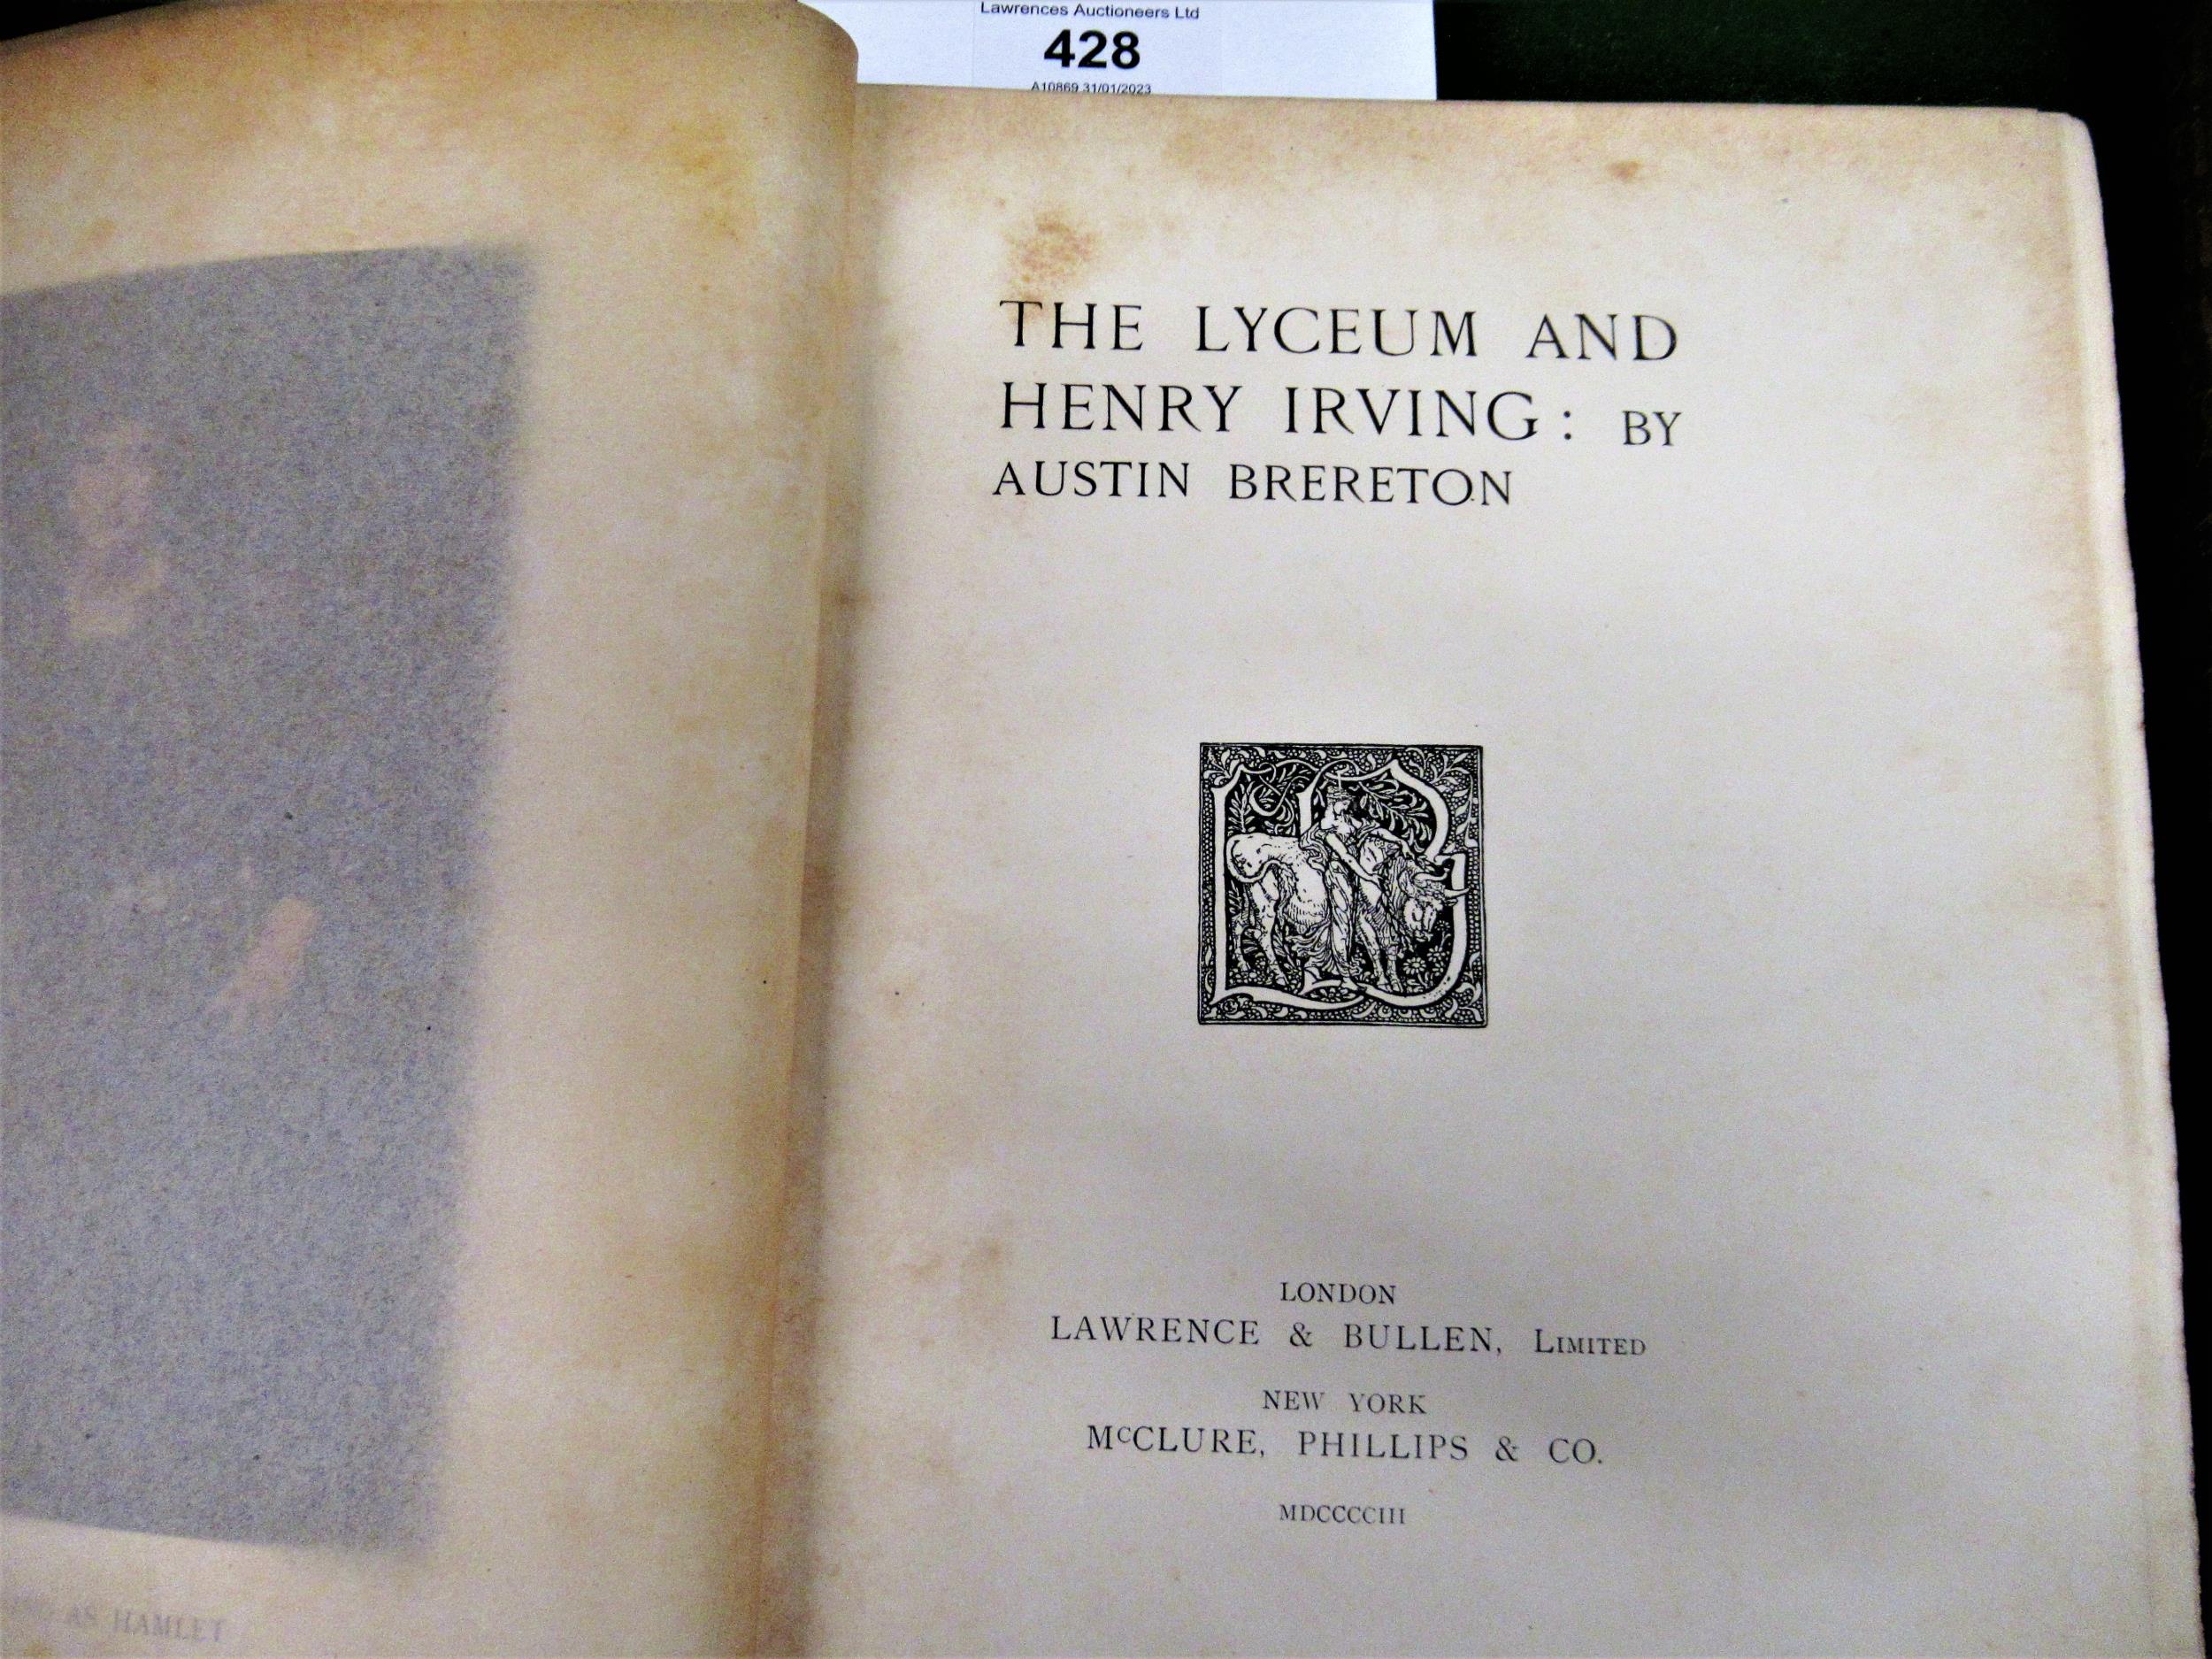 ' The Lyceum and Henry Irving ' by Austin Brereton, Limited Edition copy No. 309 of 1500, with - Image 2 of 21